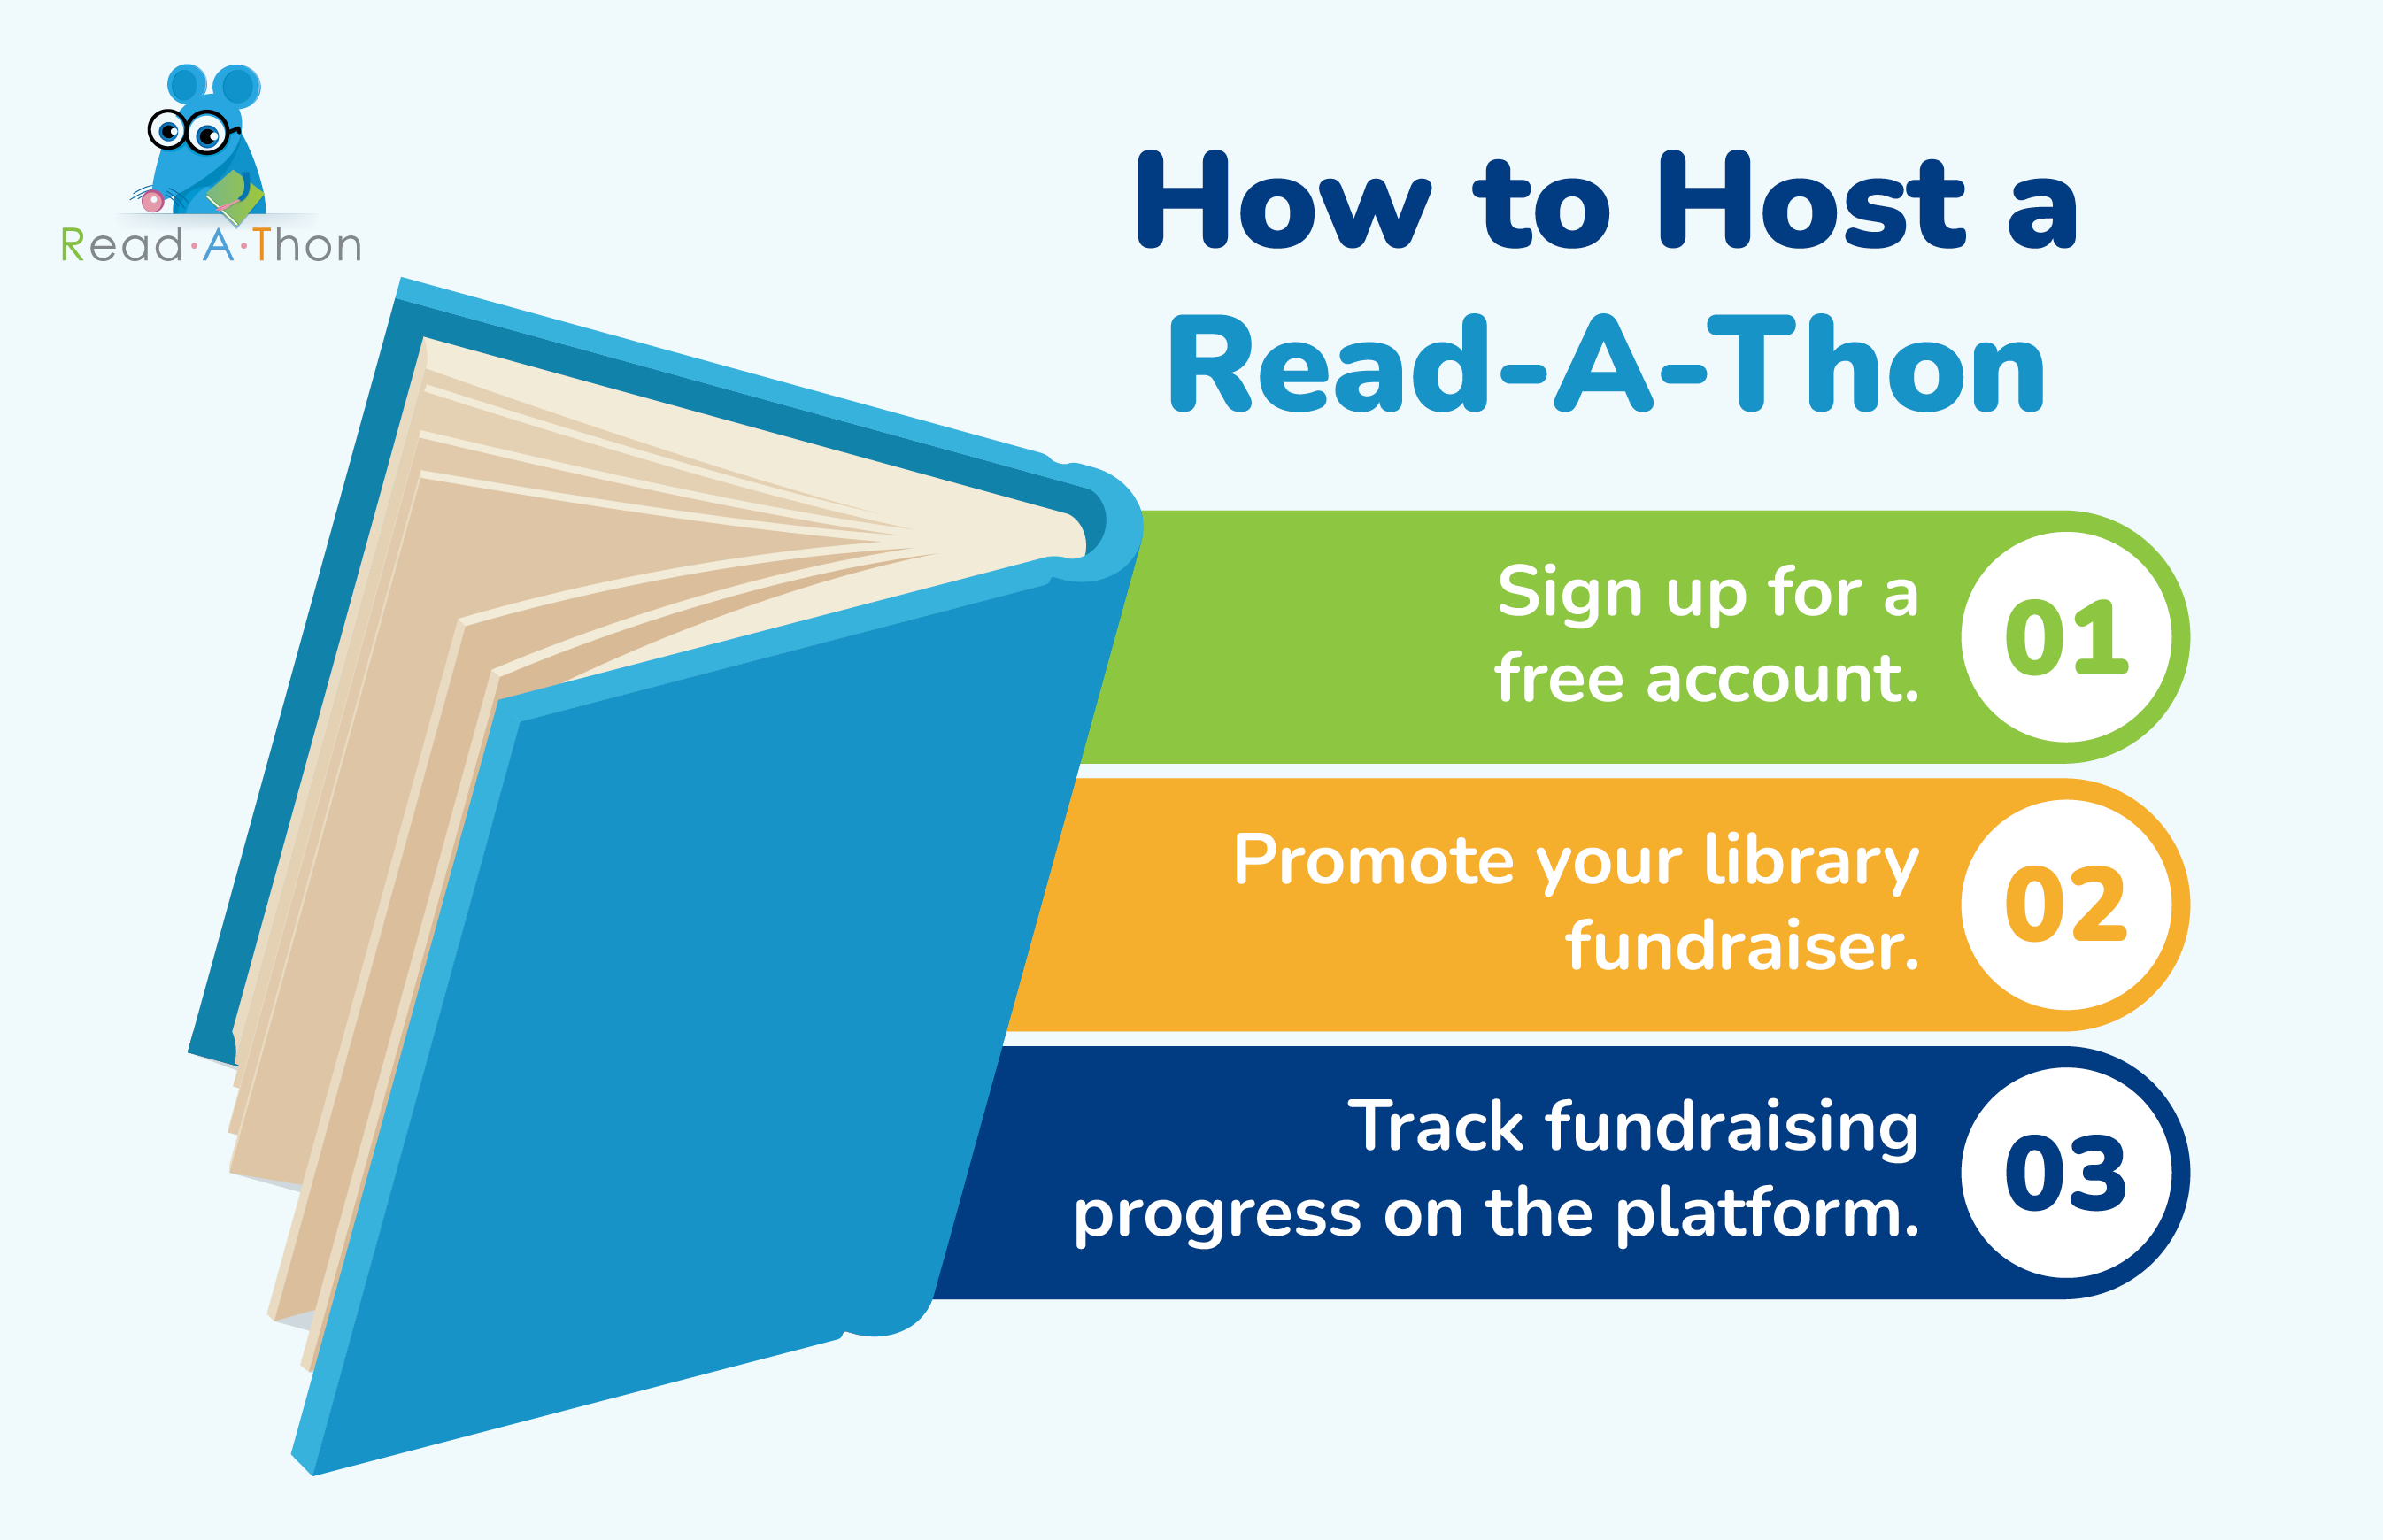 The steps for hosting a Read-A-Thon as a library fundraising idea, as explained in more detail below.